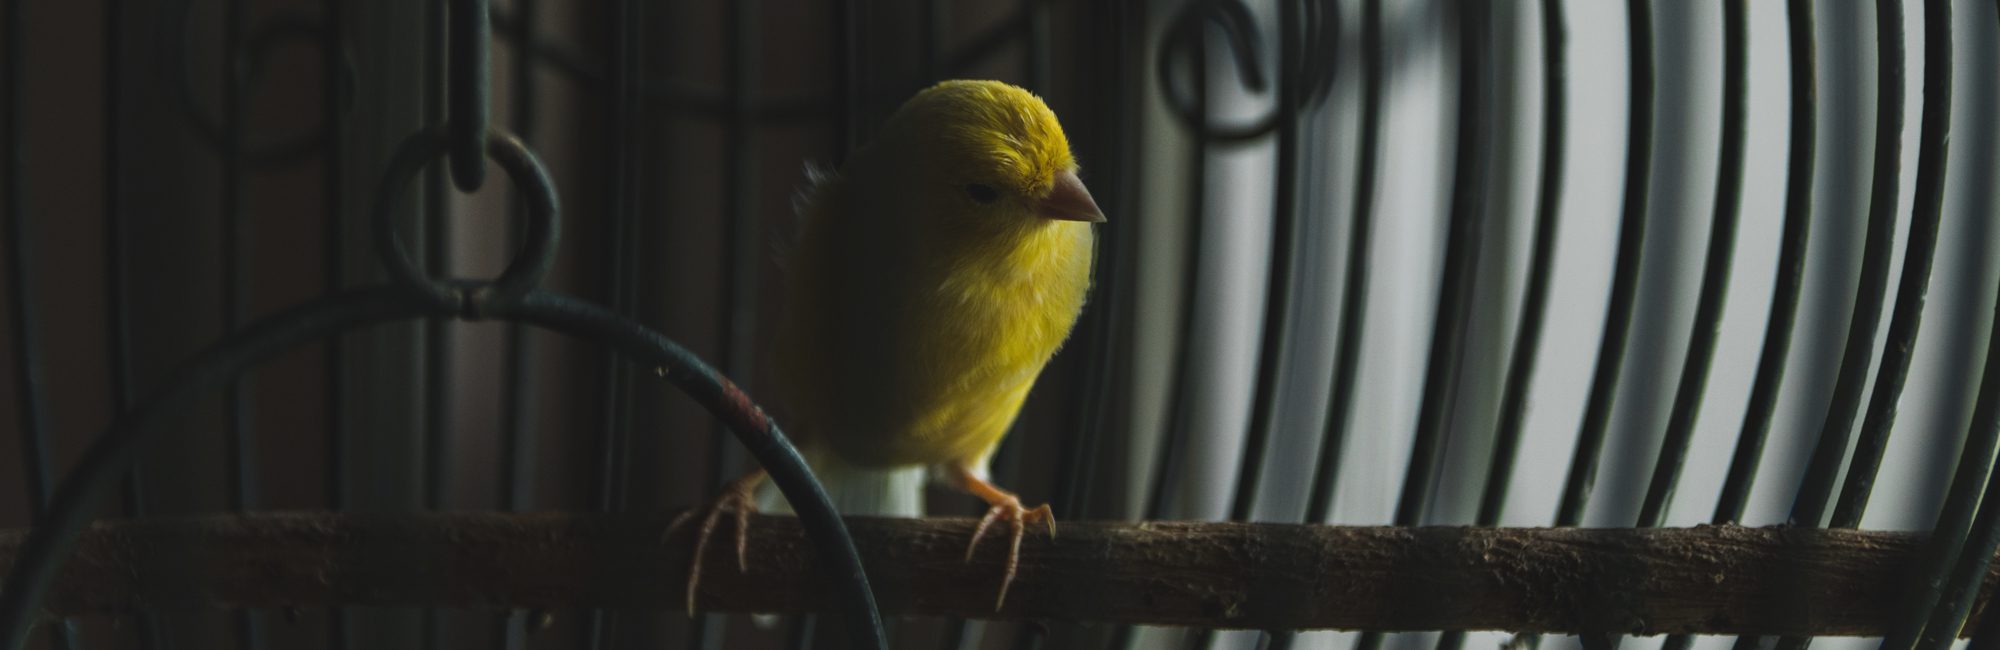 COVID-19 Memoirs - Yellow bird in a birdcage in a shadowy room